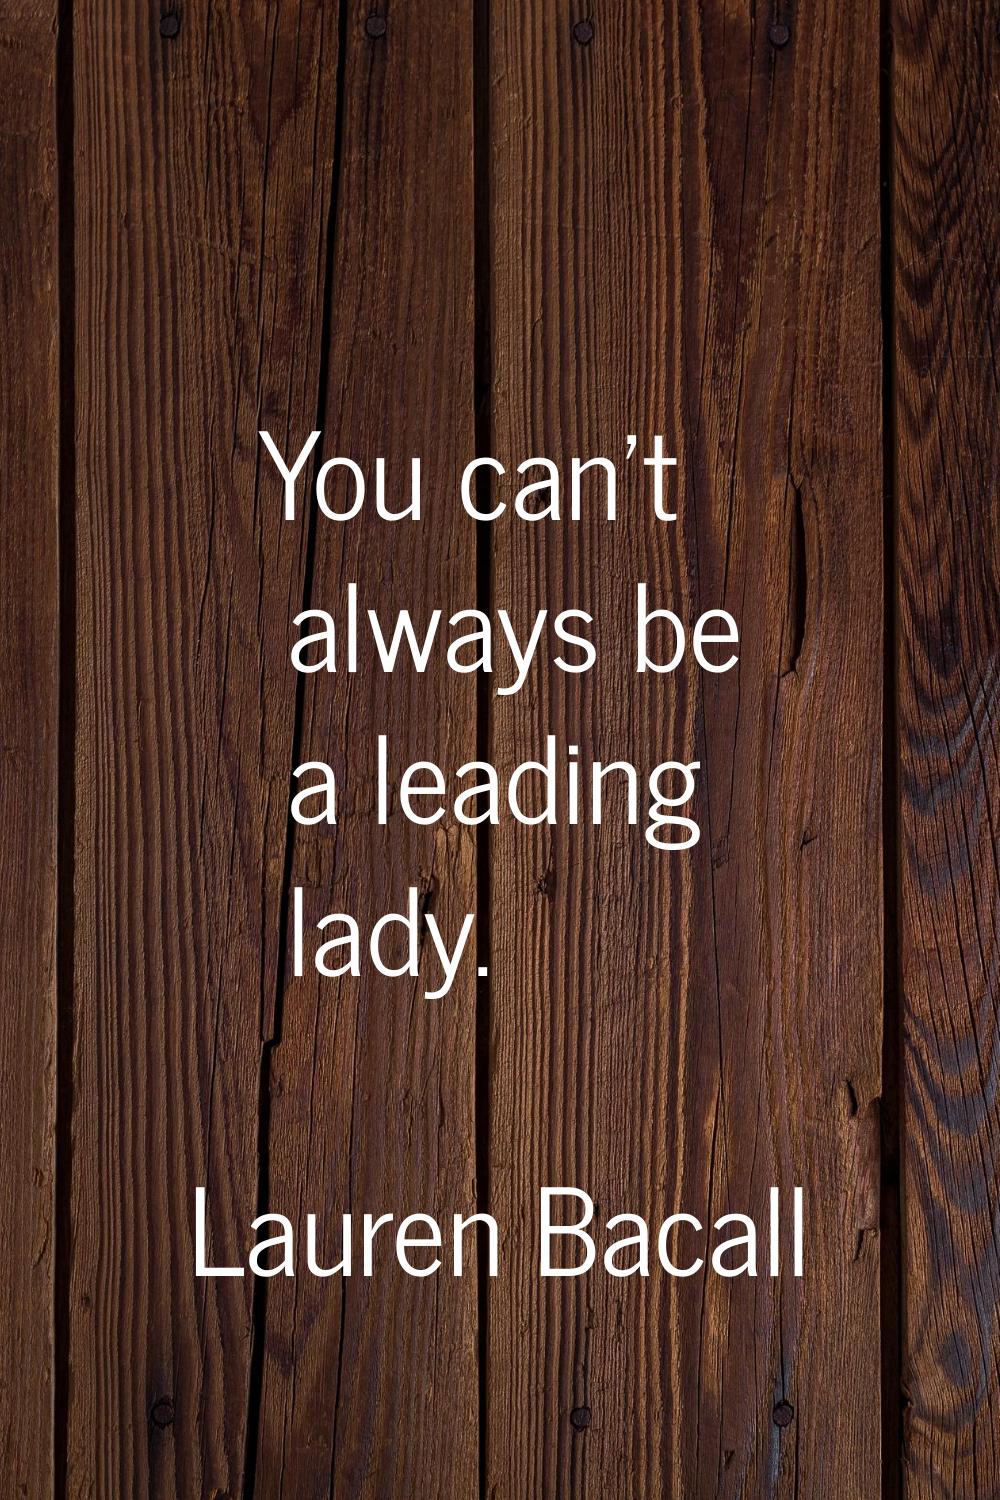 You can't always be a leading lady.